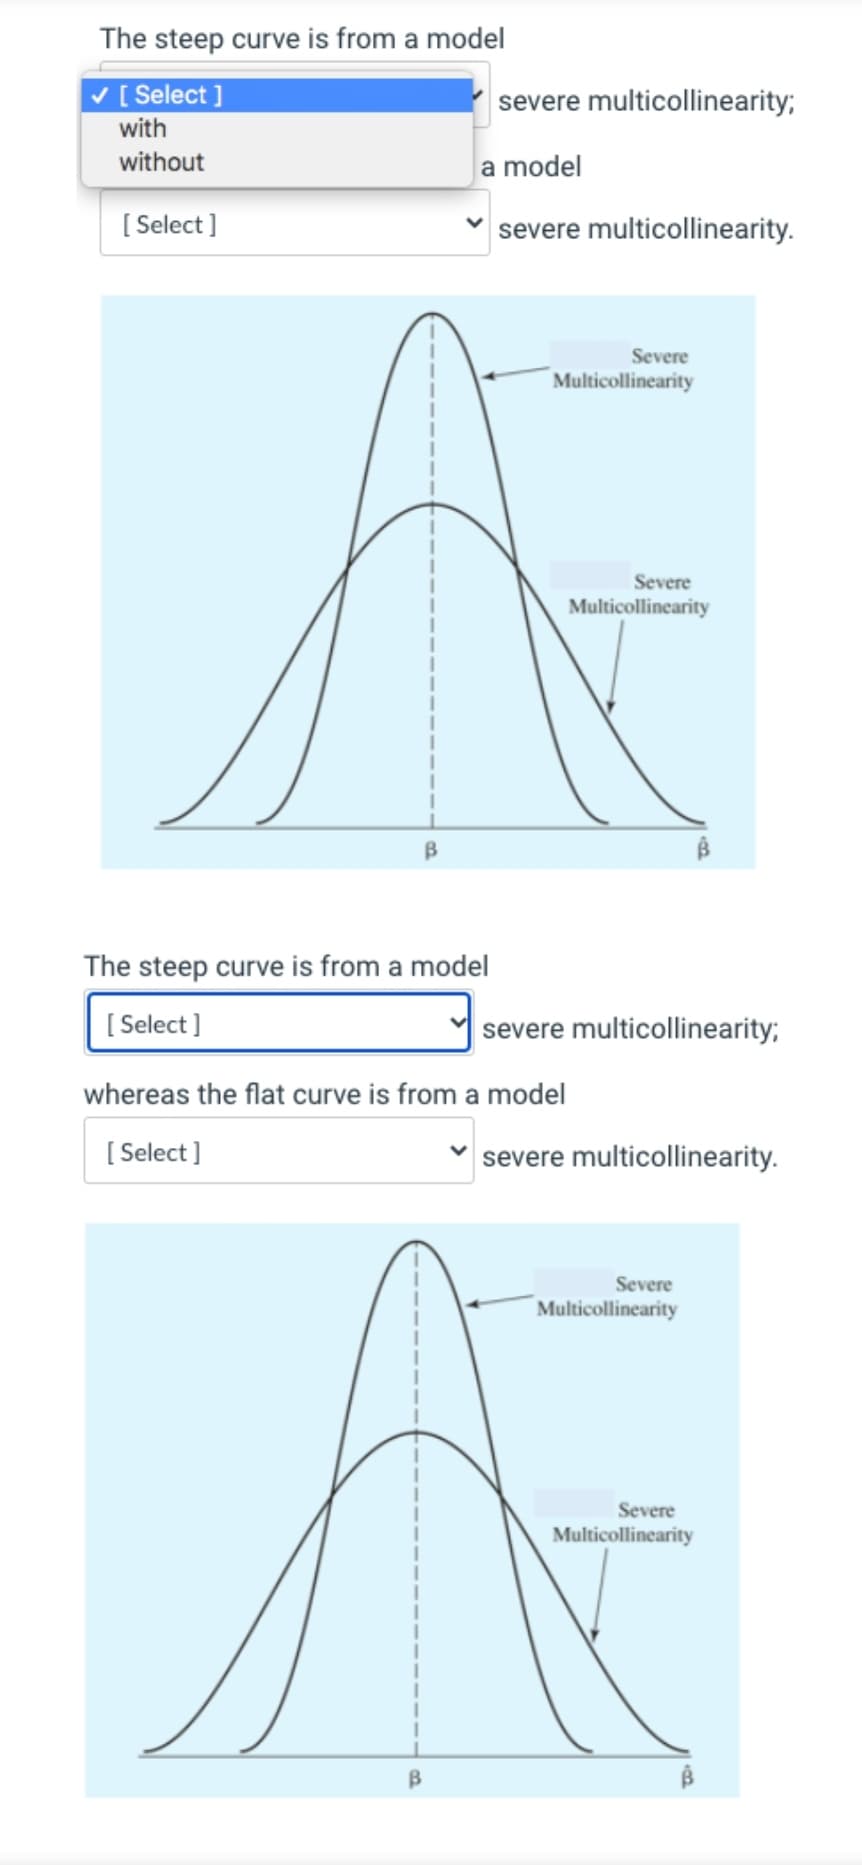 The steep curve is from a model
V [ Select ]
severe multicollinearity;
with
without
a model
[ Select ]
severe multicollinearity.
Severe
Multicollinearity
Severe
Multicollinearity
The steep curve is from a model
[ Select ]
severe multicollinearity;
whereas the flat curve is from a model
[ Select ]
severe multicollinearity.
Severe
Multicollinearity
Severe
Multicollinearity
B.
